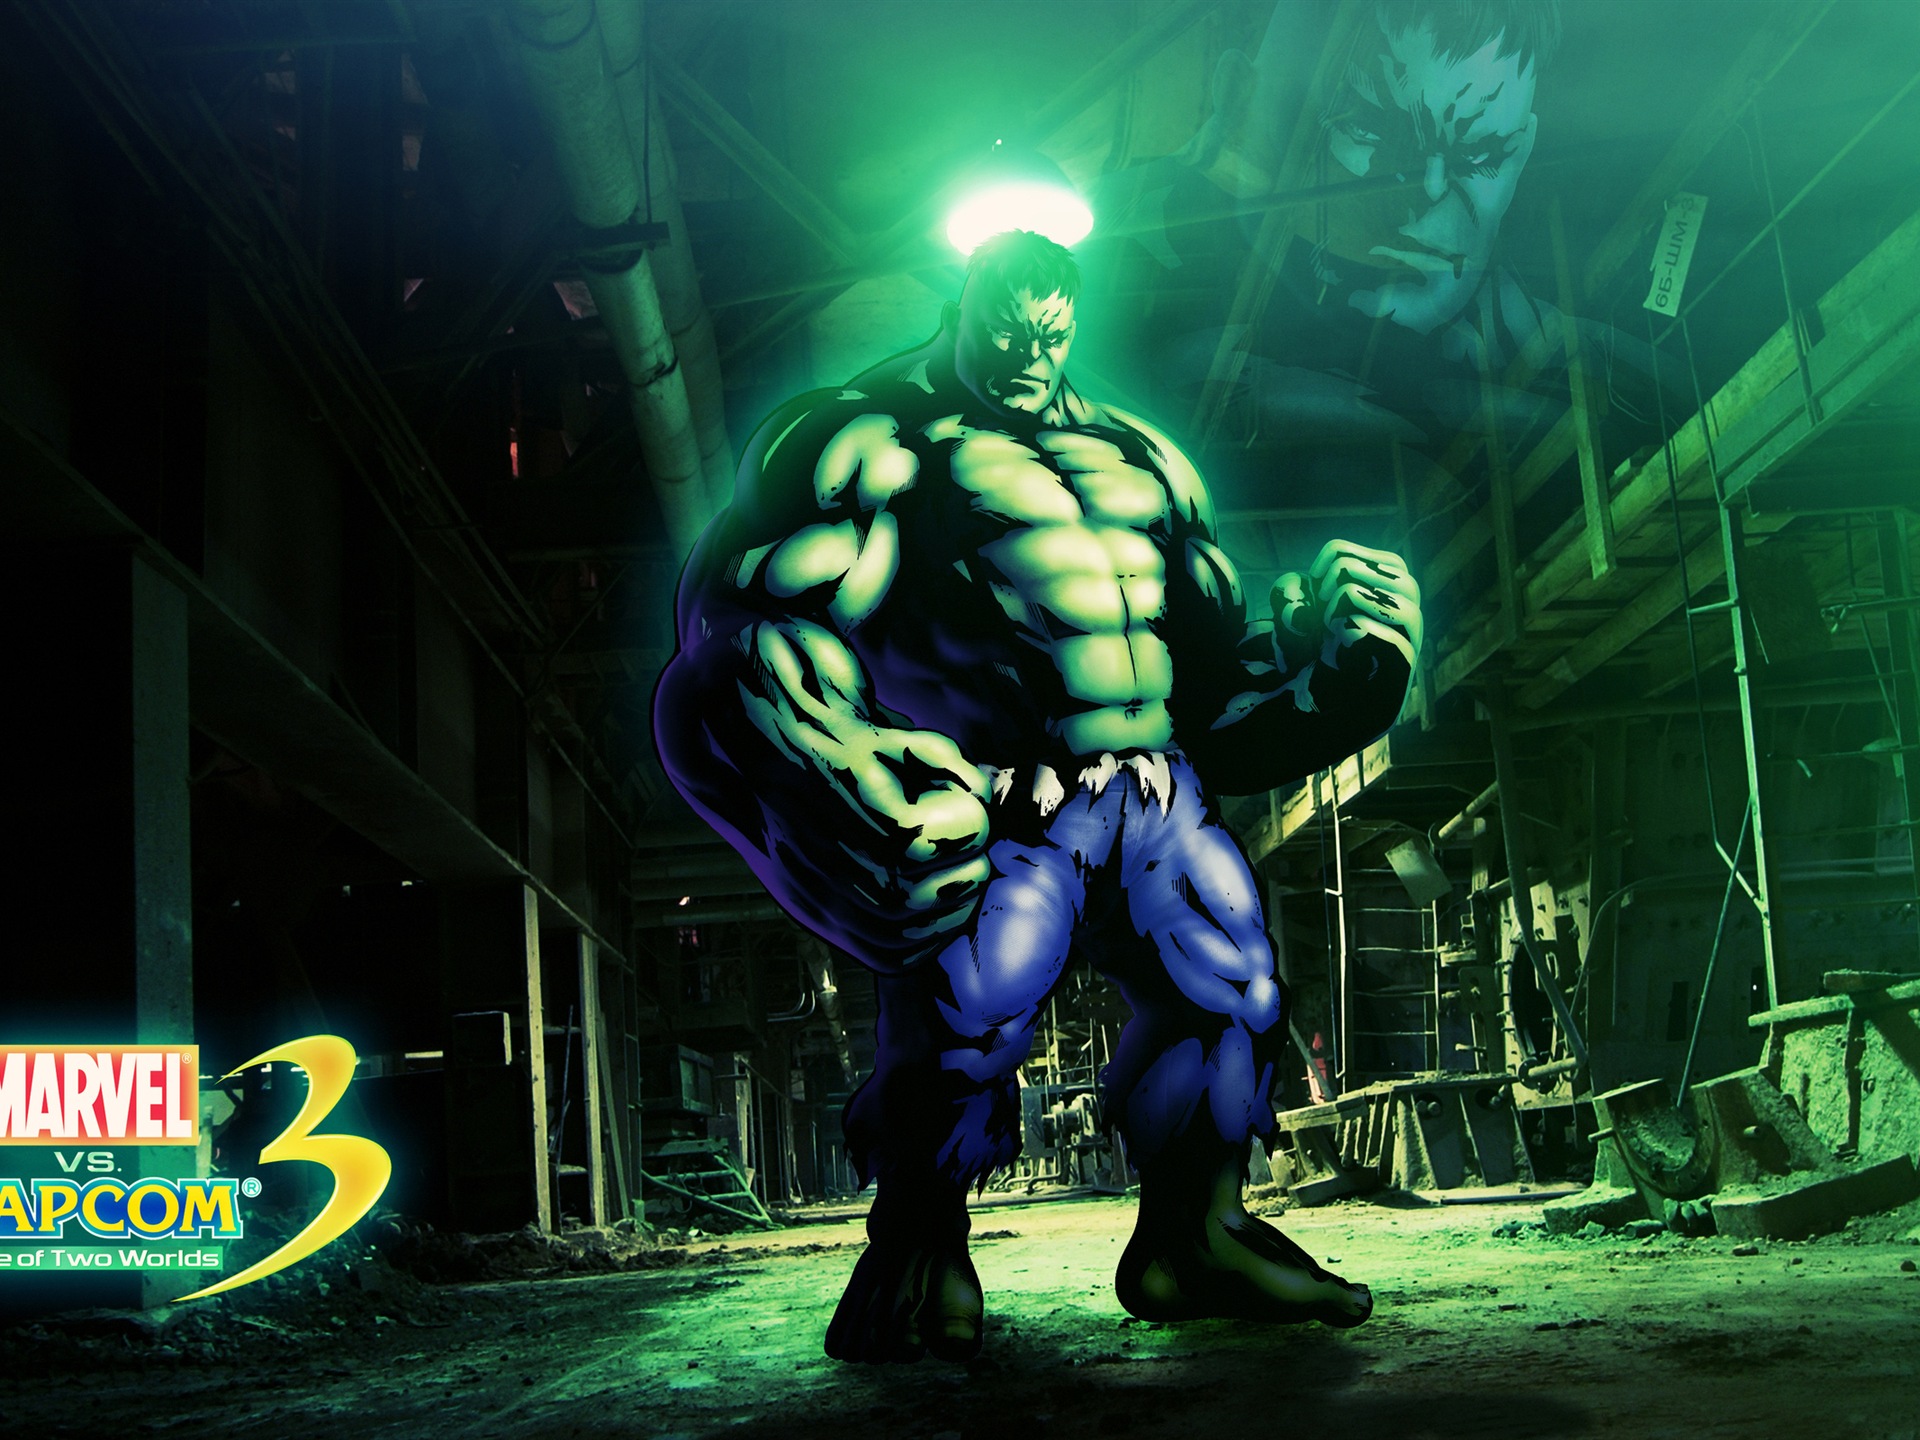 Marvel VS. Capcom 3: Fate of Two Worlds HD game wallpapers #11 - 1920x1440